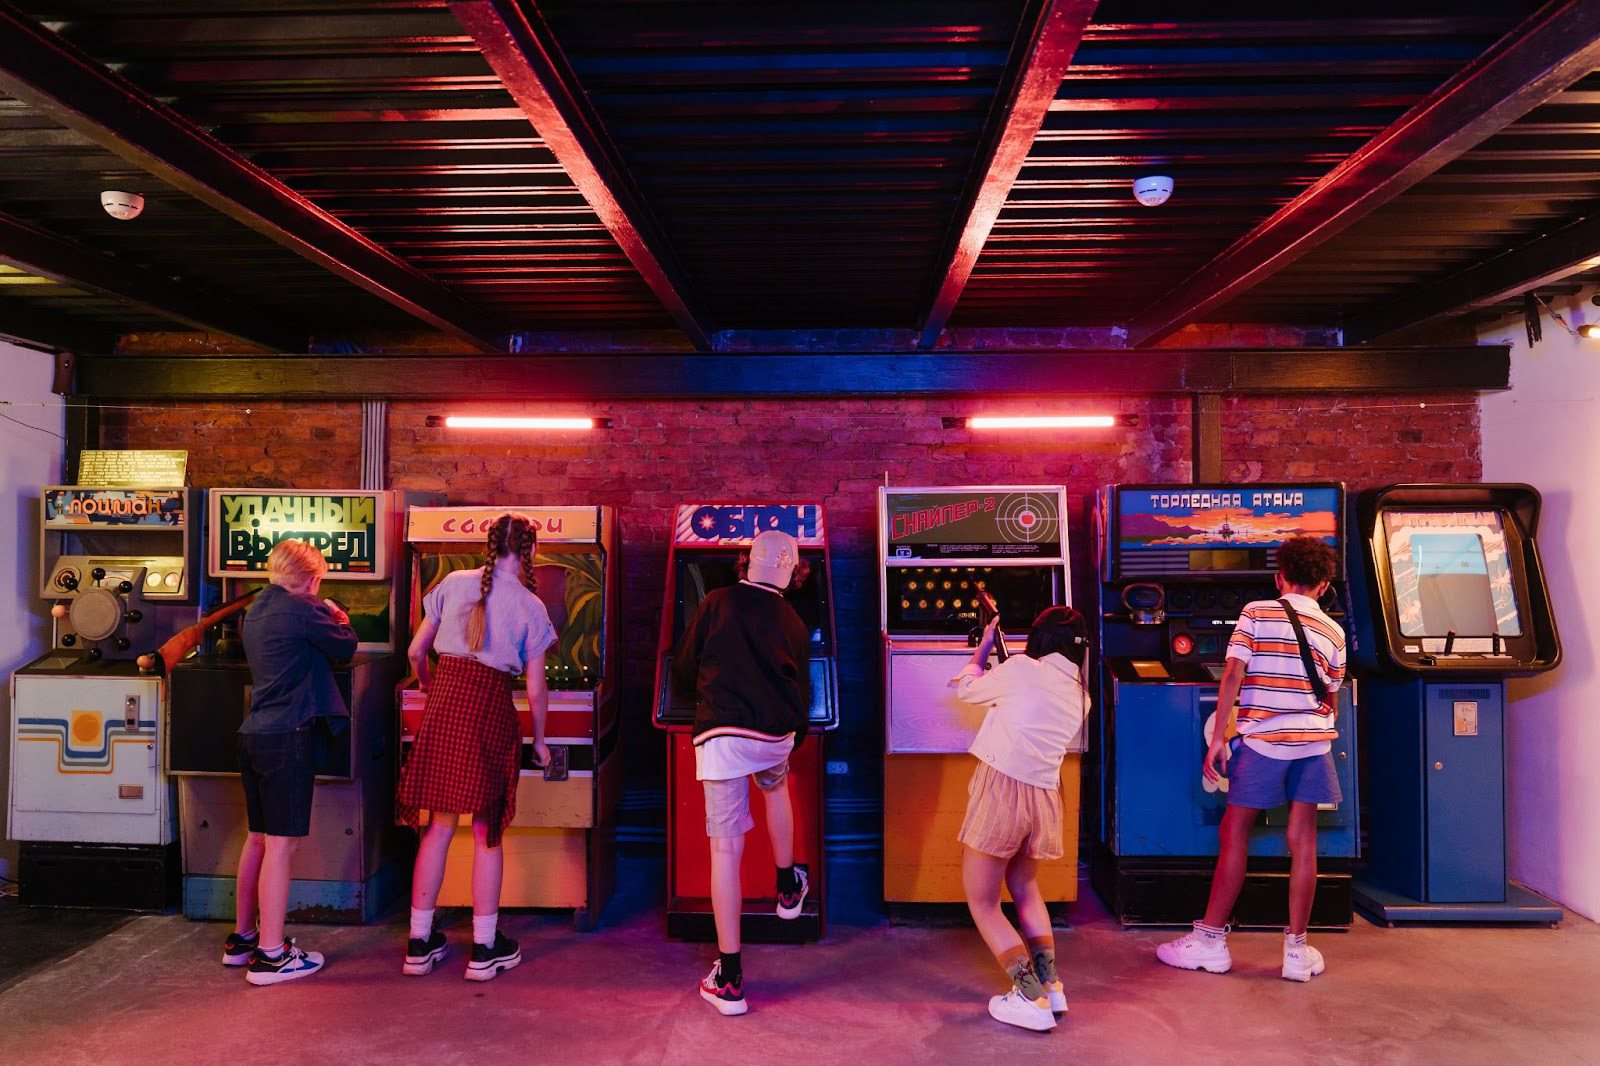 How to save money while enjoying the arcade experience?